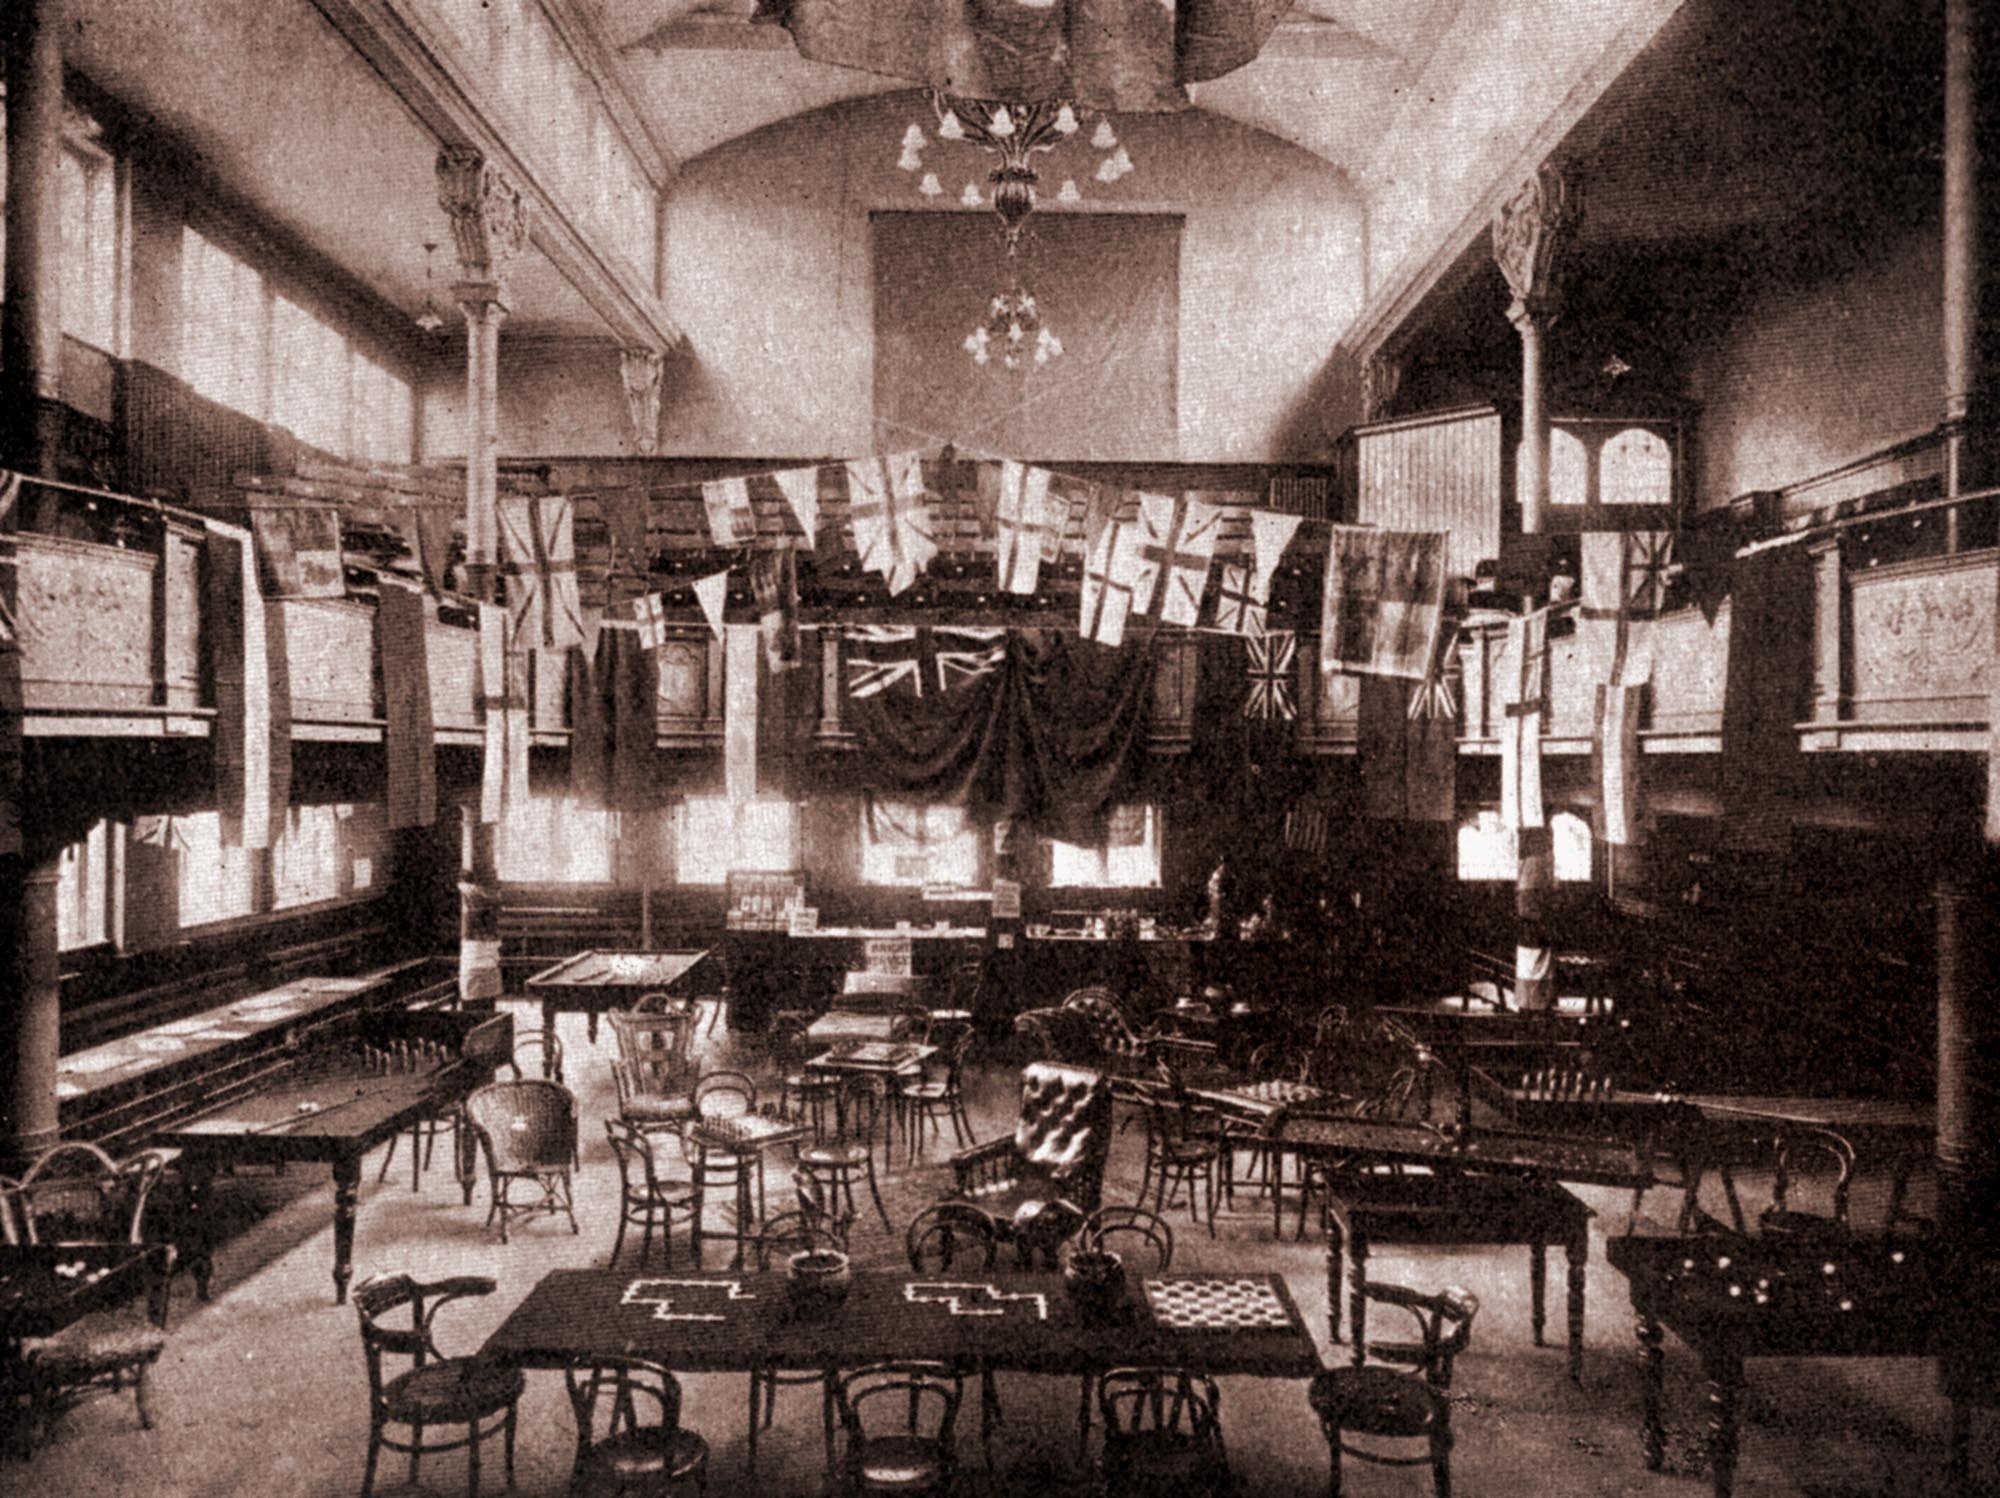 Interior of the YMCA during WWI, 1915 -